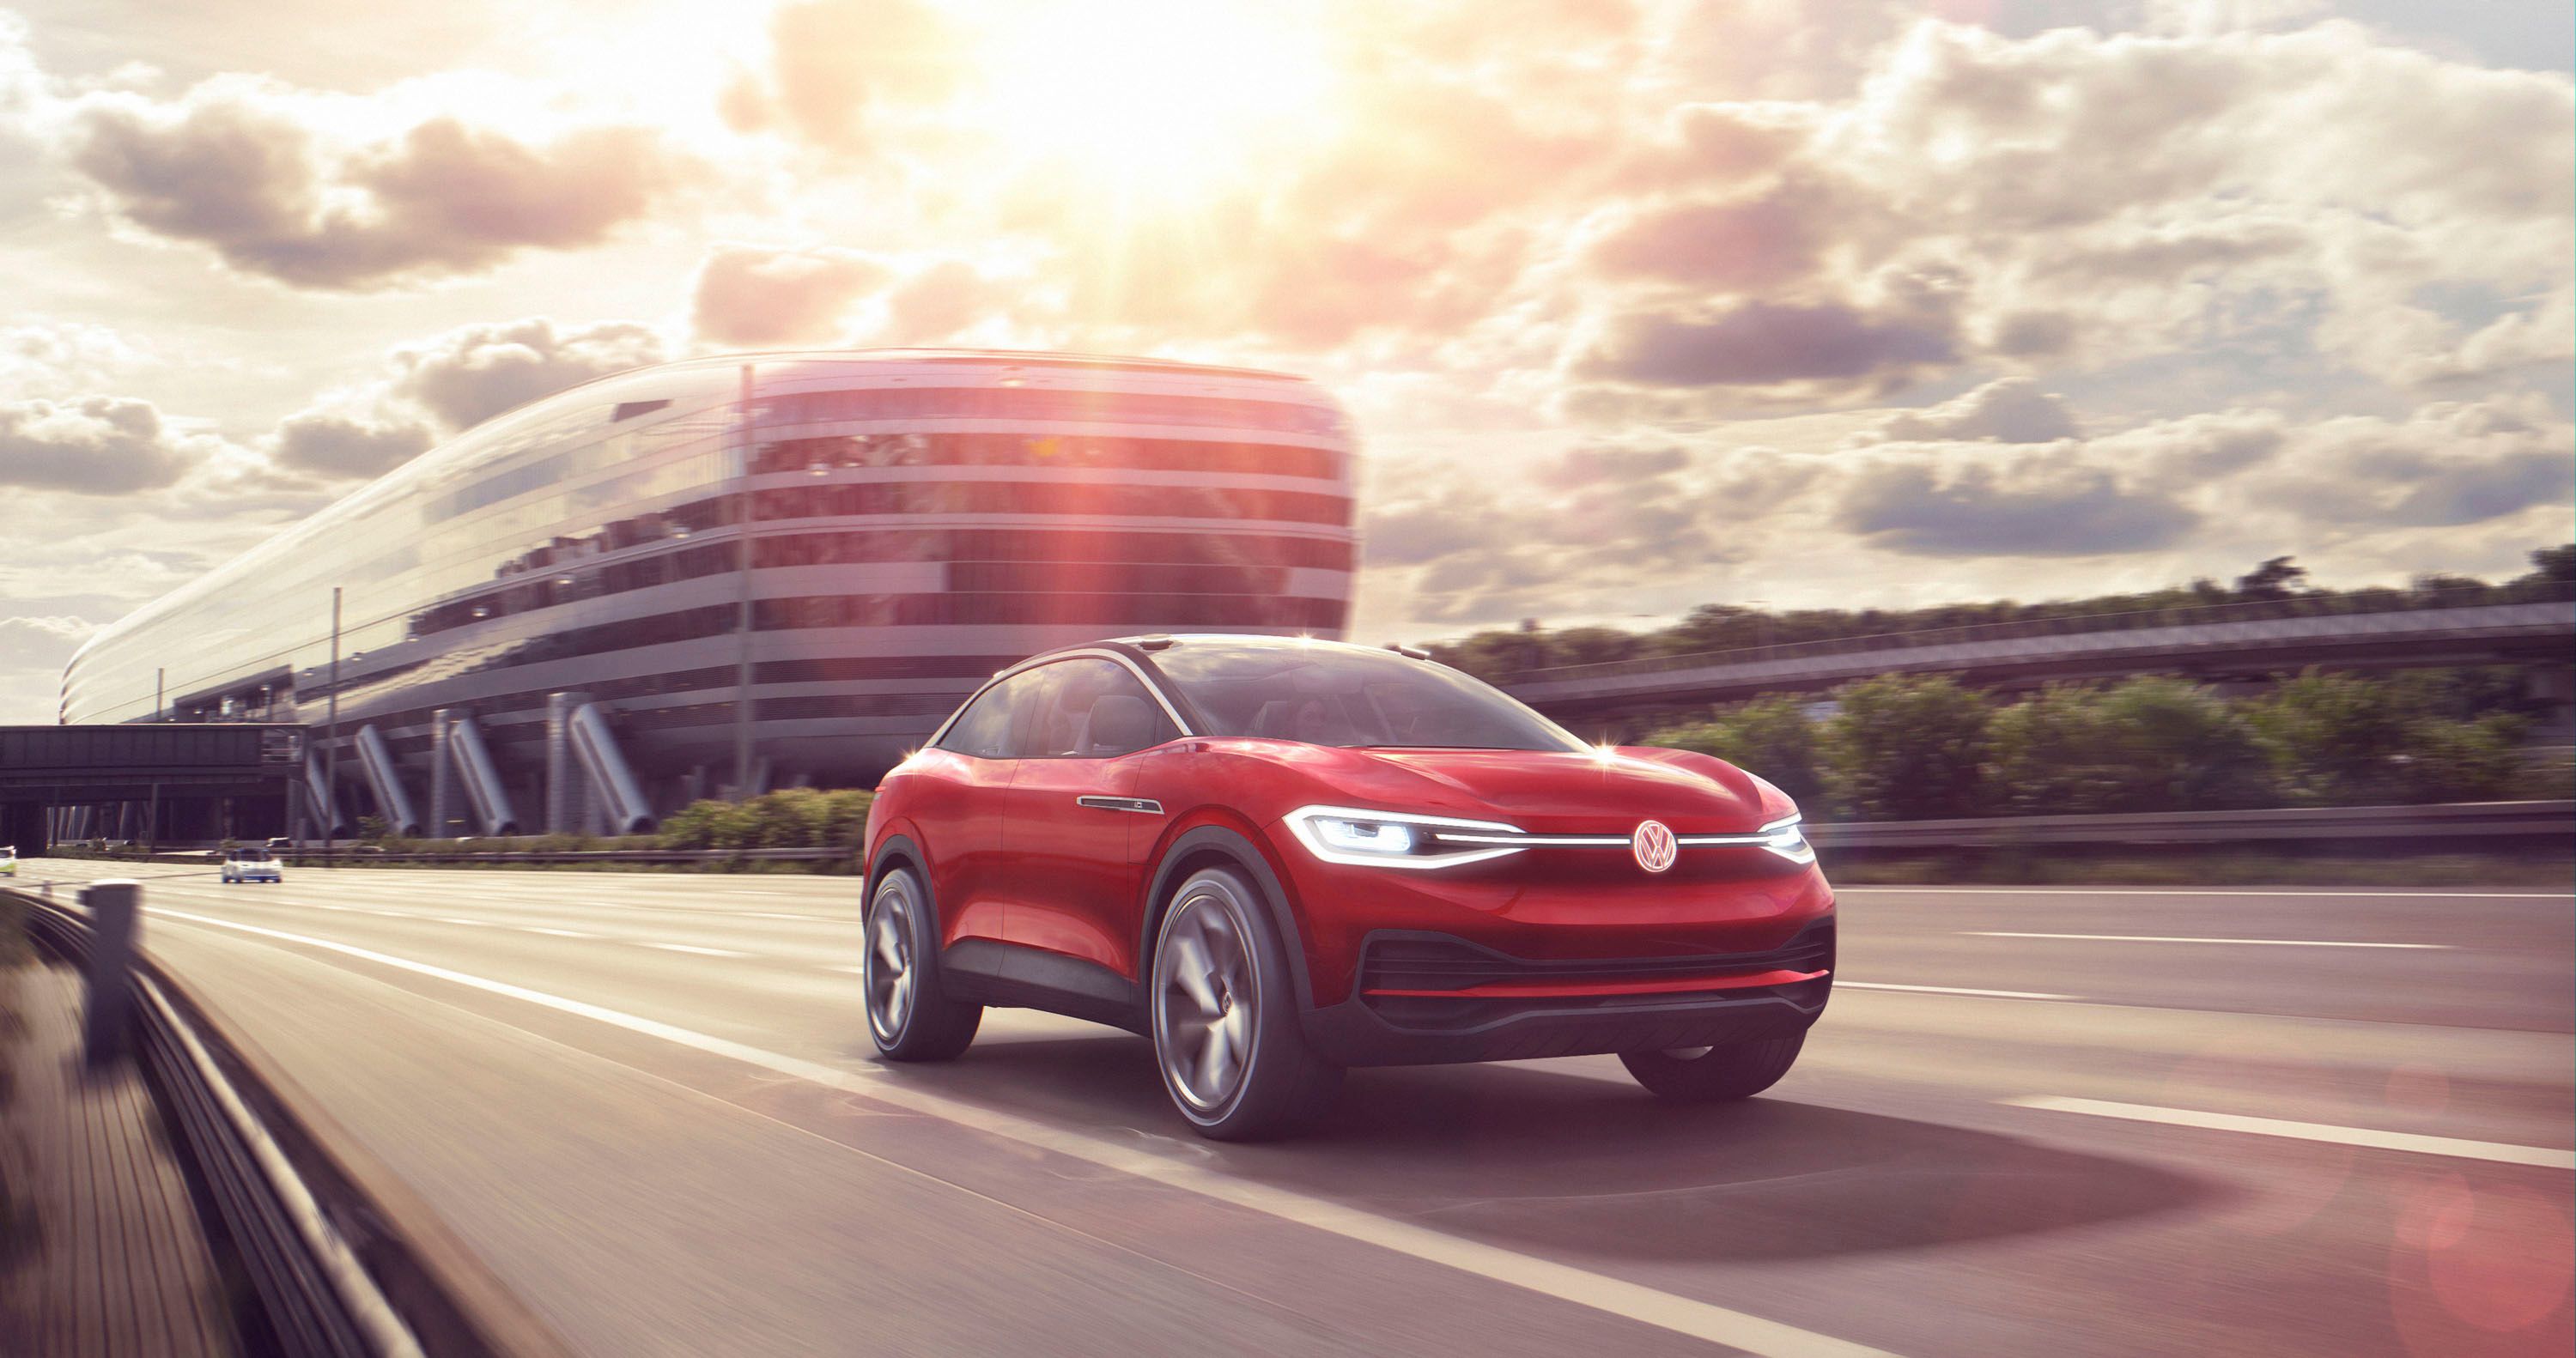 2019 The entry-level electric Volkswagen will cost under $25,000